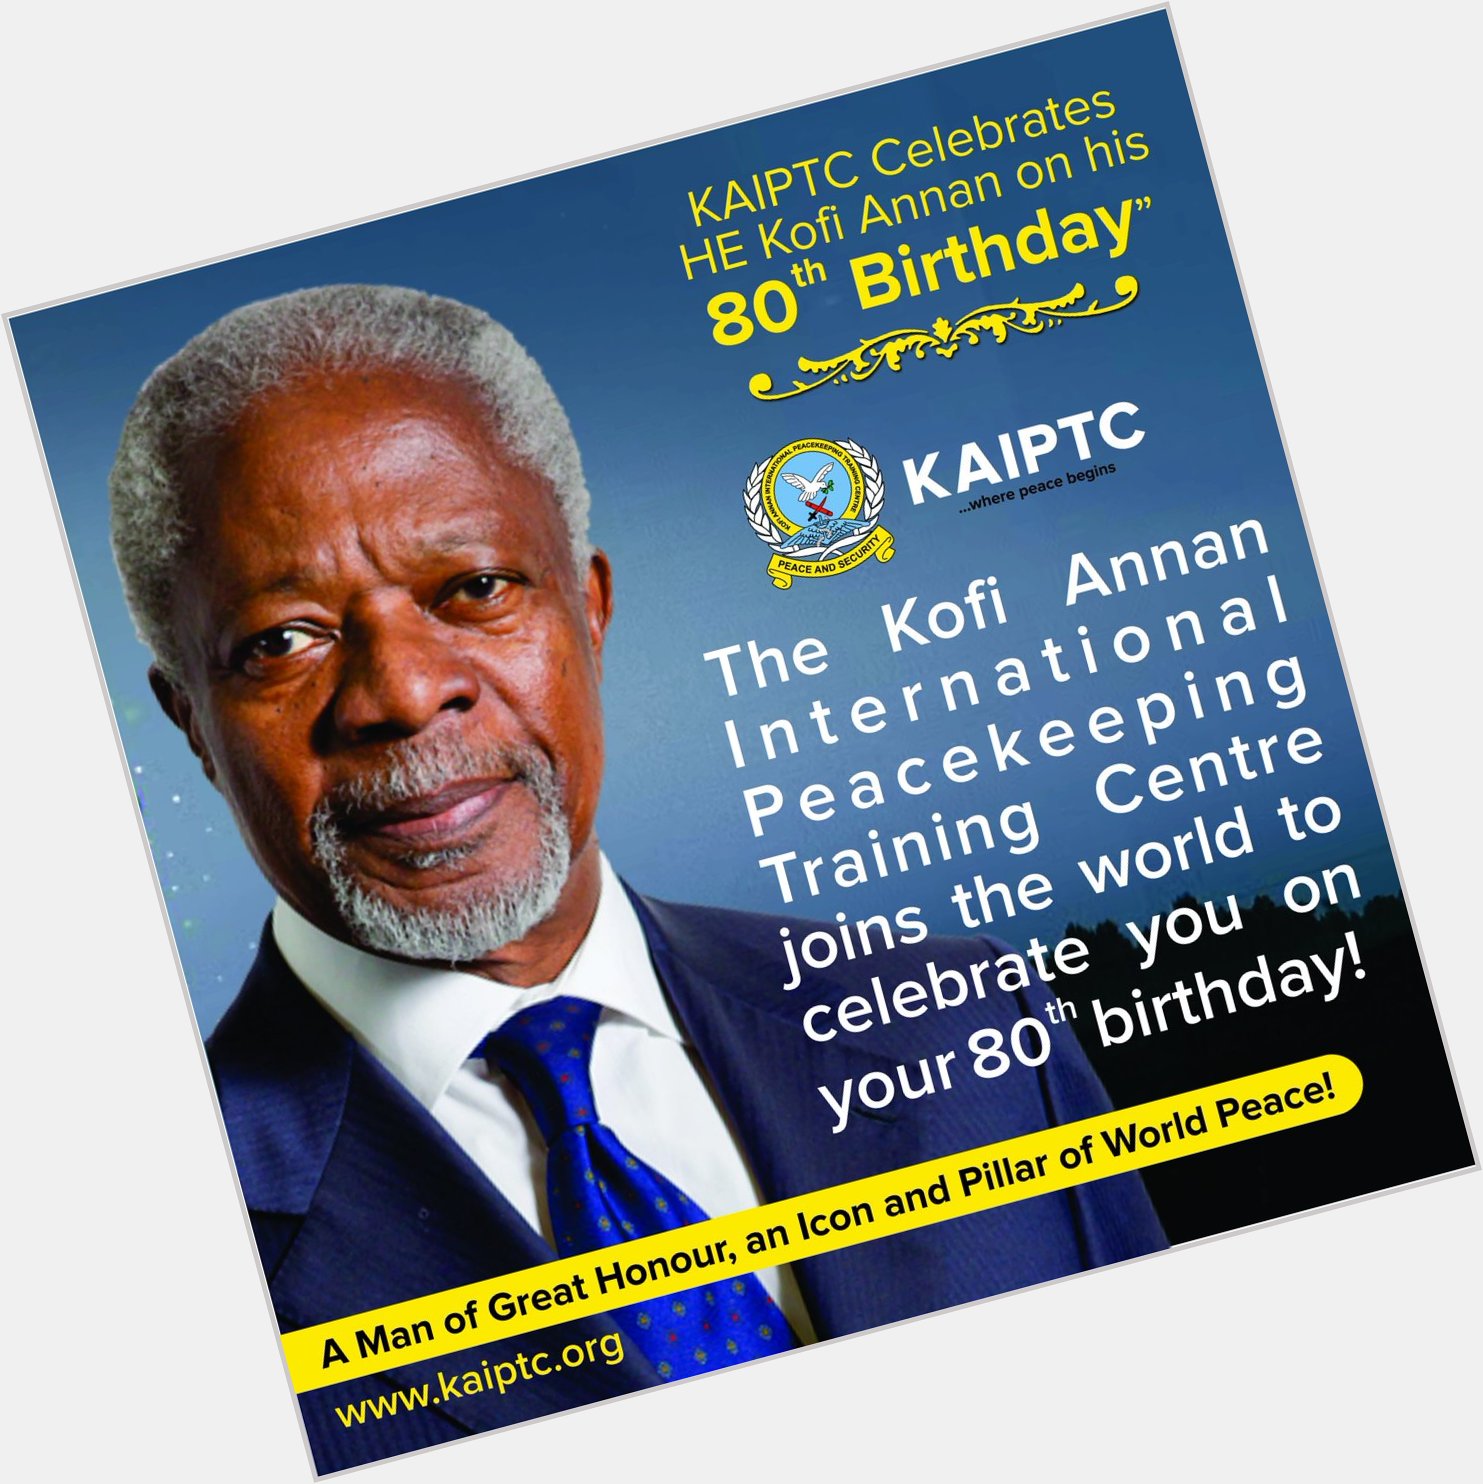 His Excellency Kofi Annan\s is 80 today! Happy birthday Sir! 